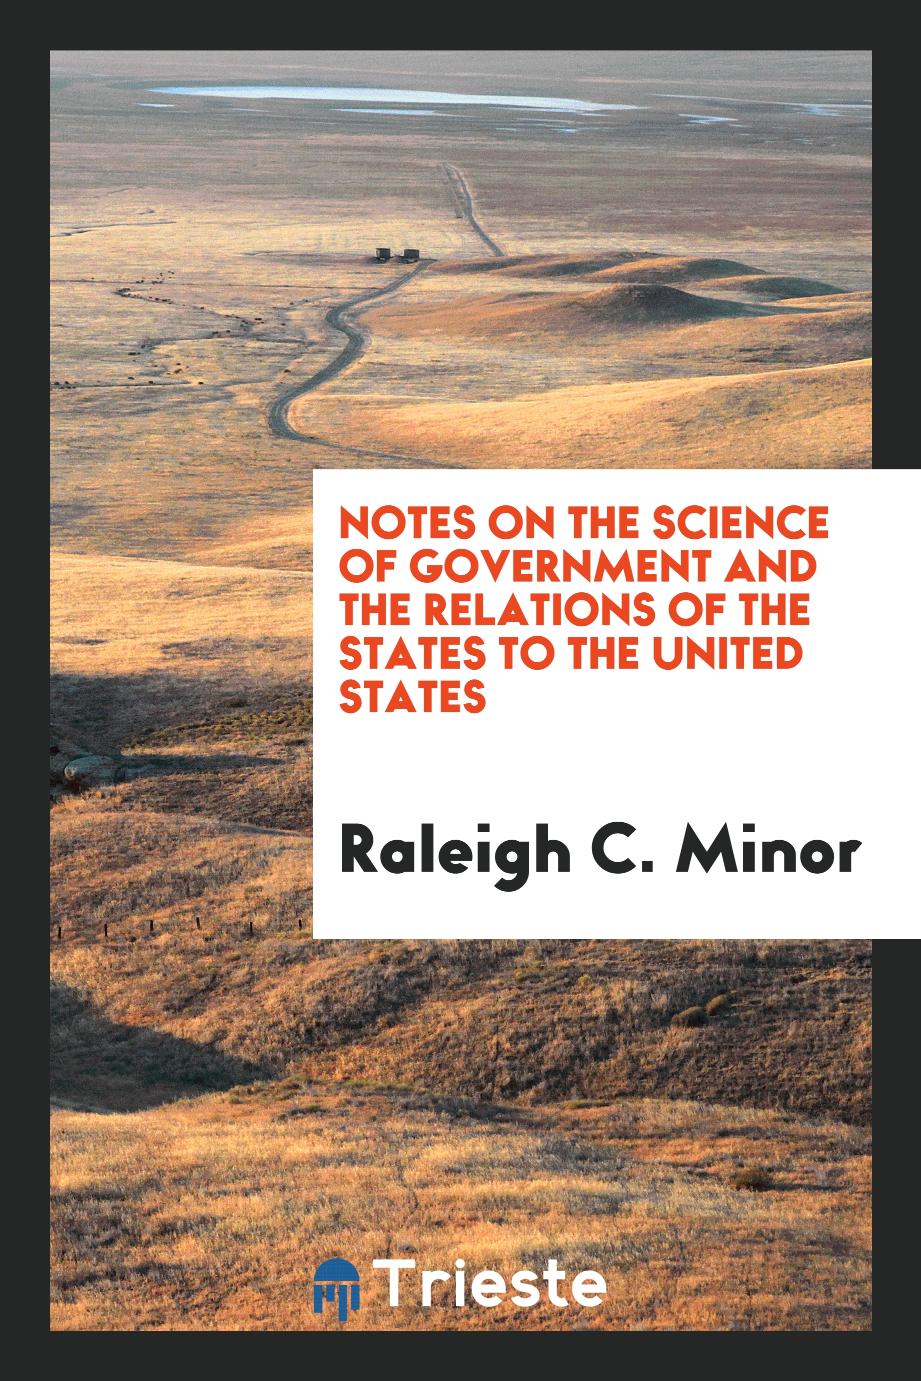 Notes on the Science of Government and the Relations of the States to the United States